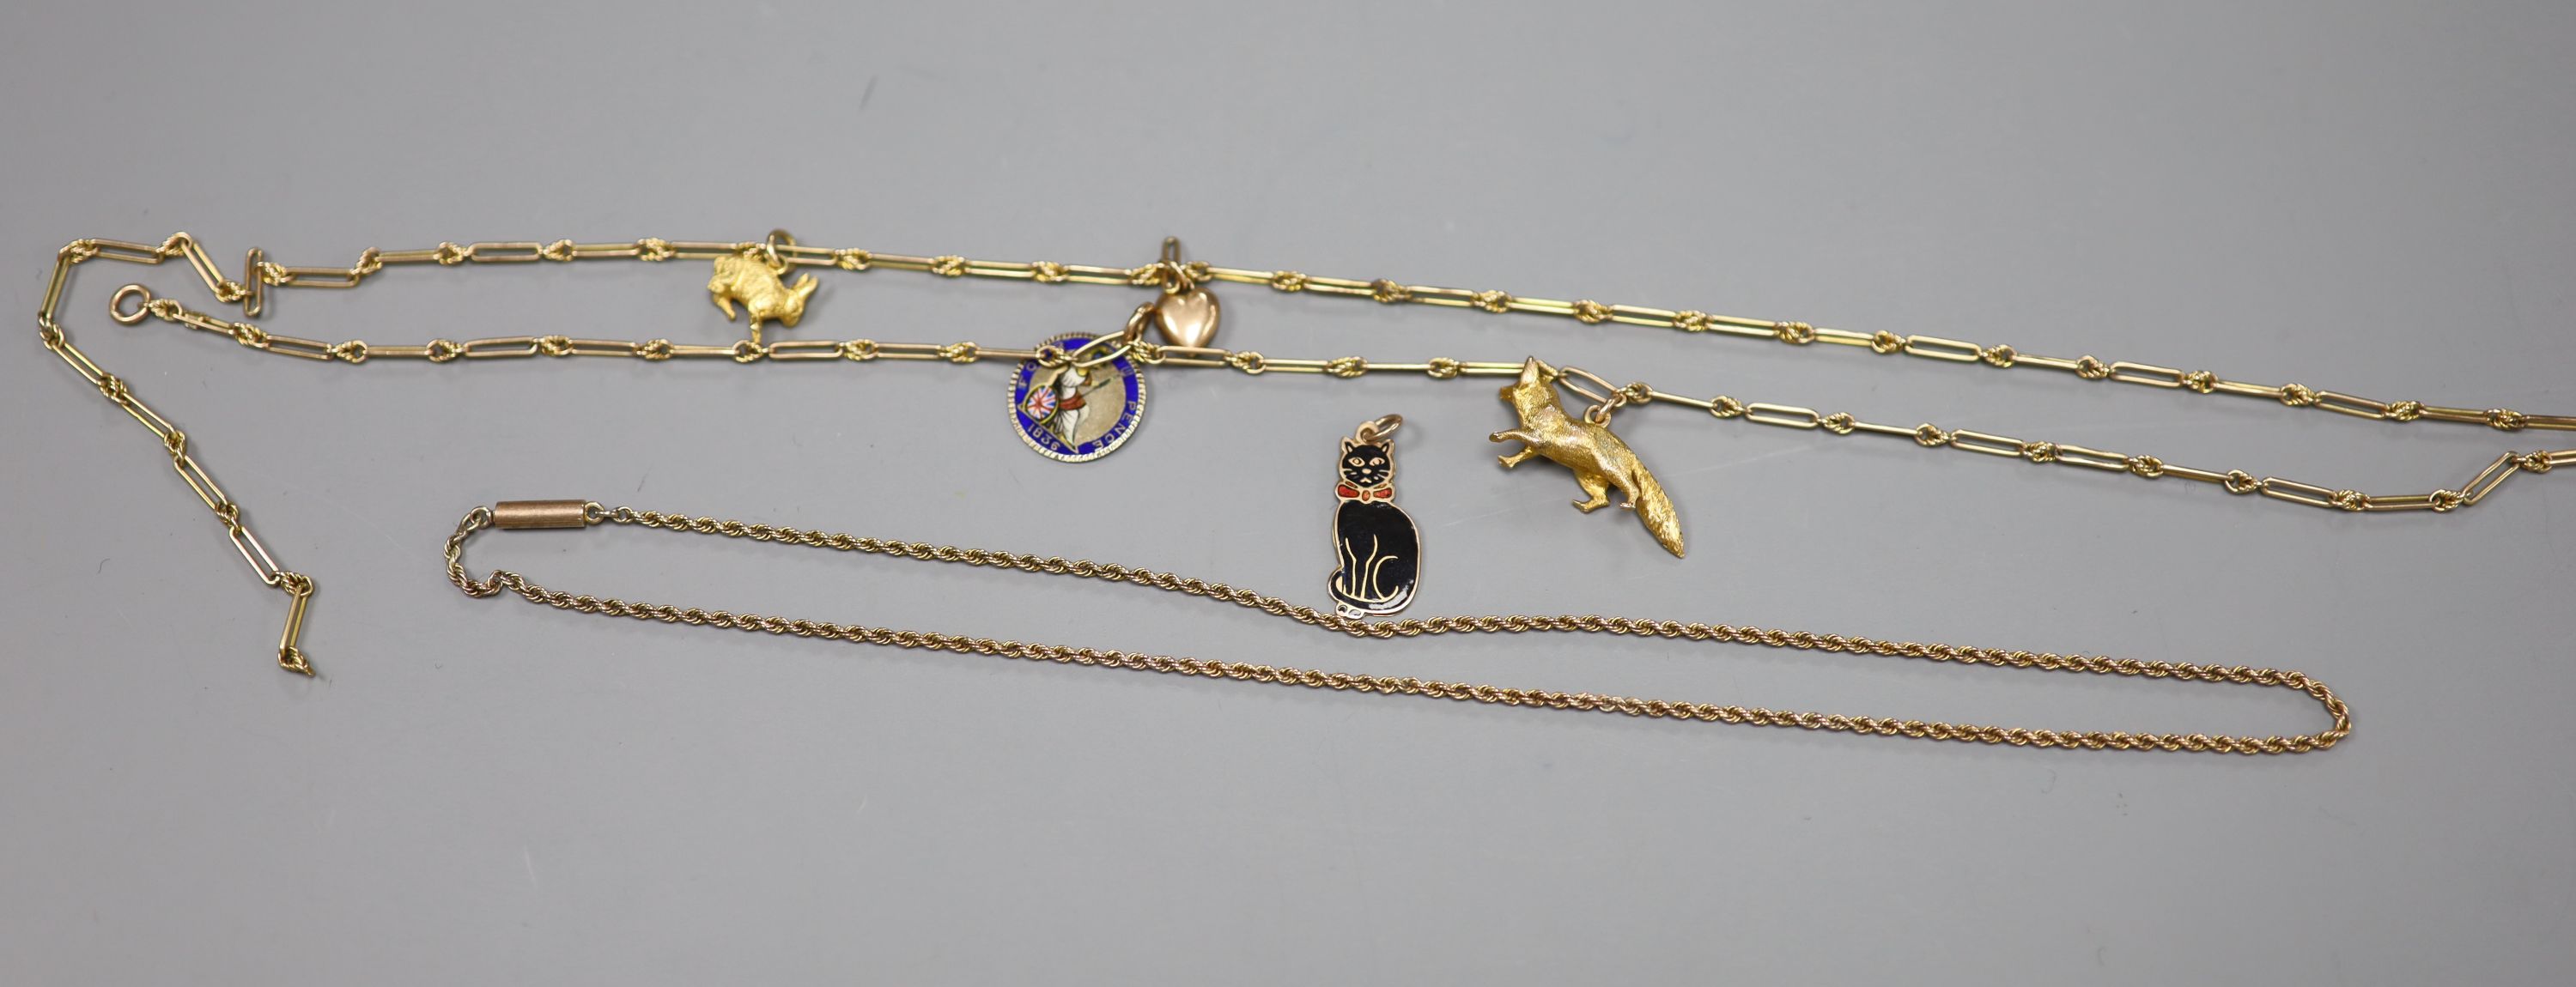 2 x 9ct necklaces, one hung with five assorted charms, gross 19.6 grams.